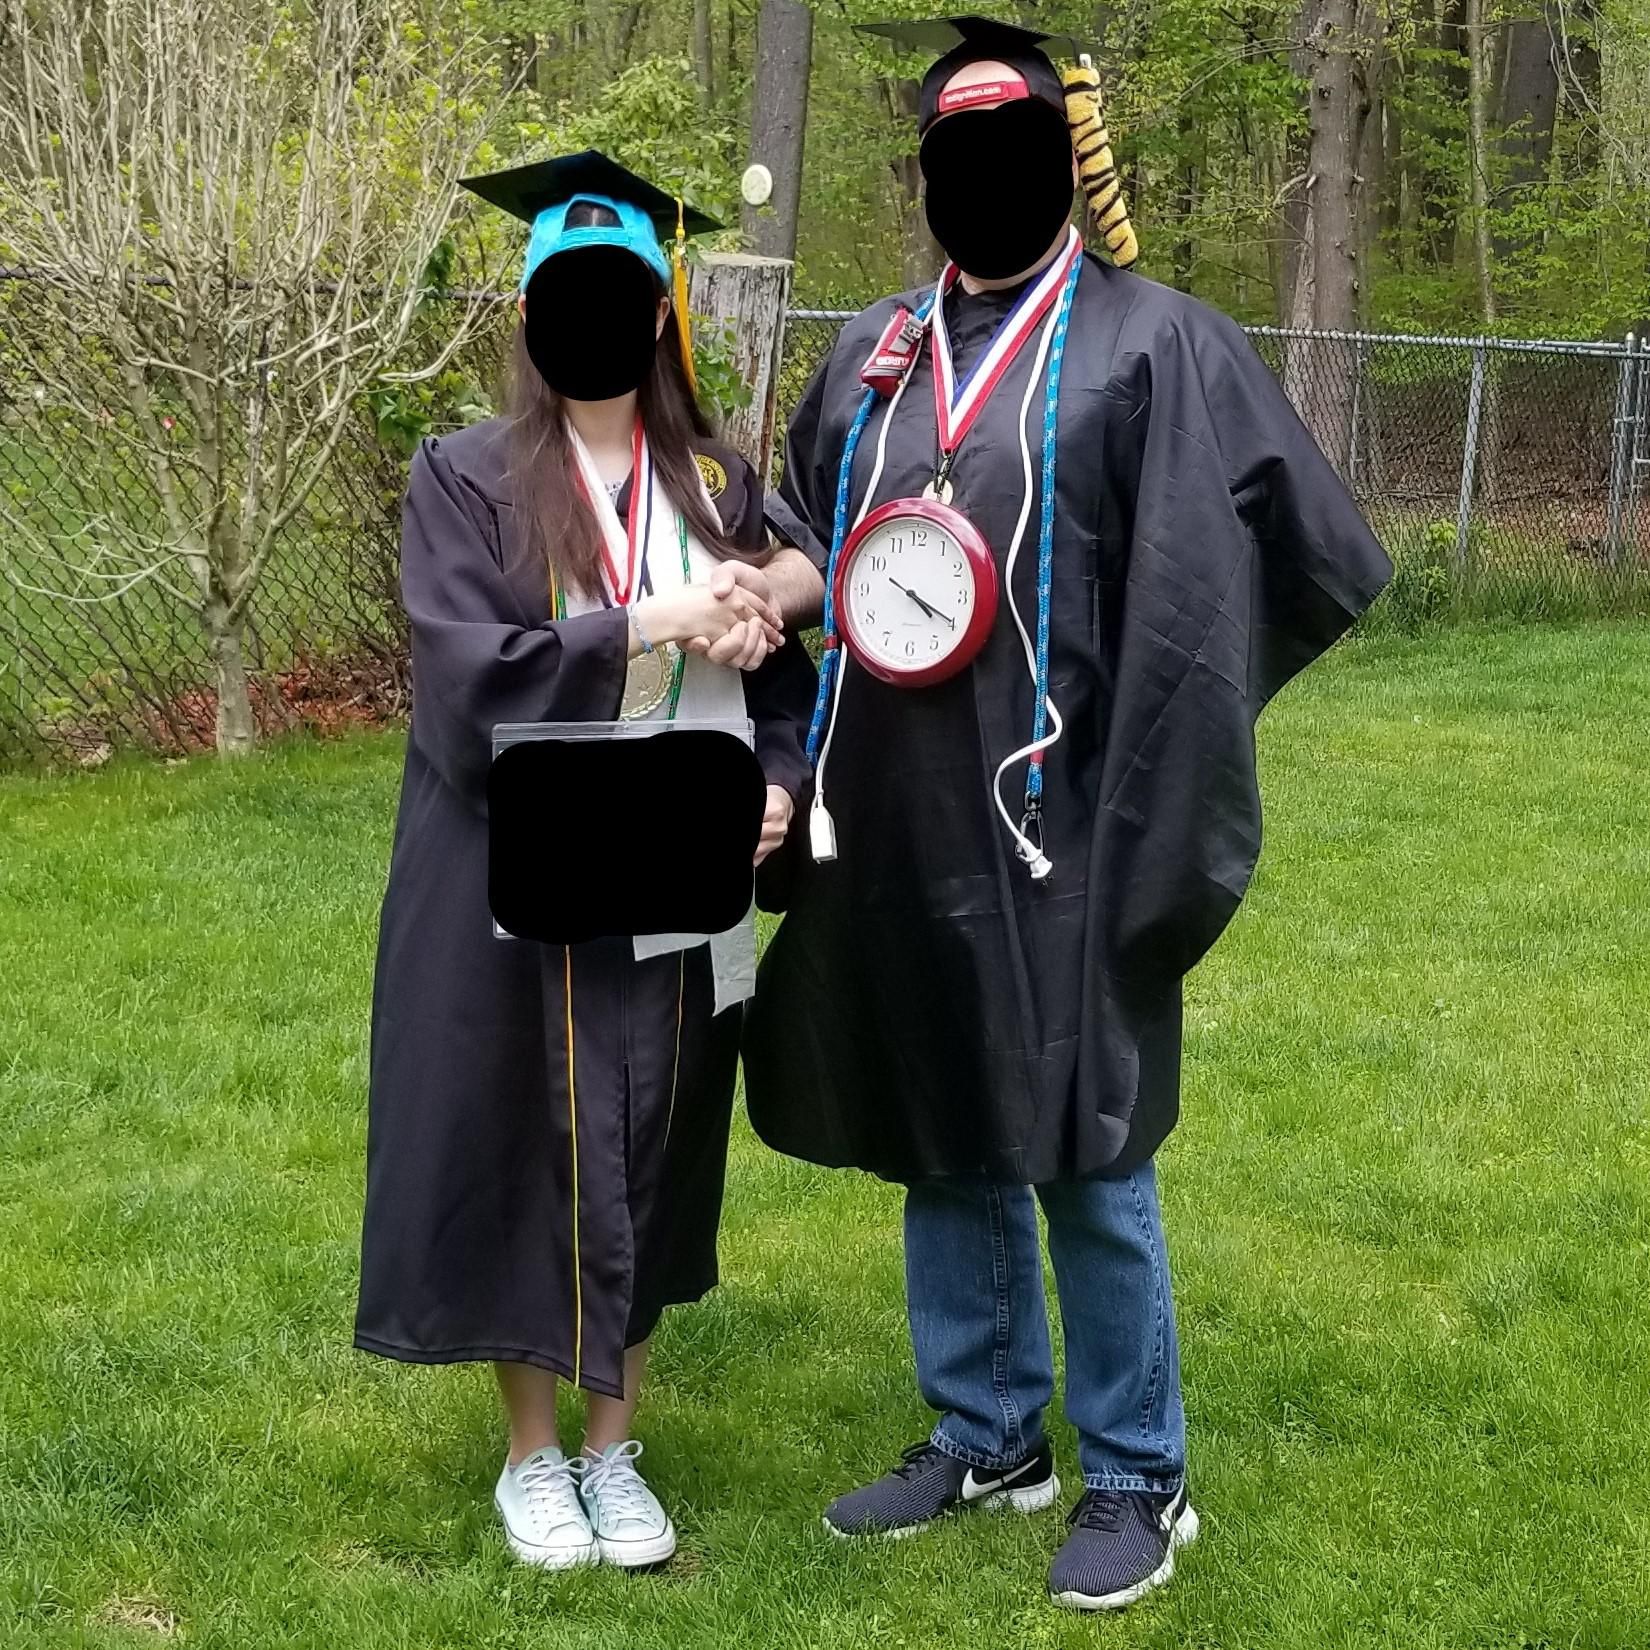 My commencement ceremony got postponed so my parents held a backyard graduation for me instead. My dad was very excited to create his own regalia to celebrate the occasion.